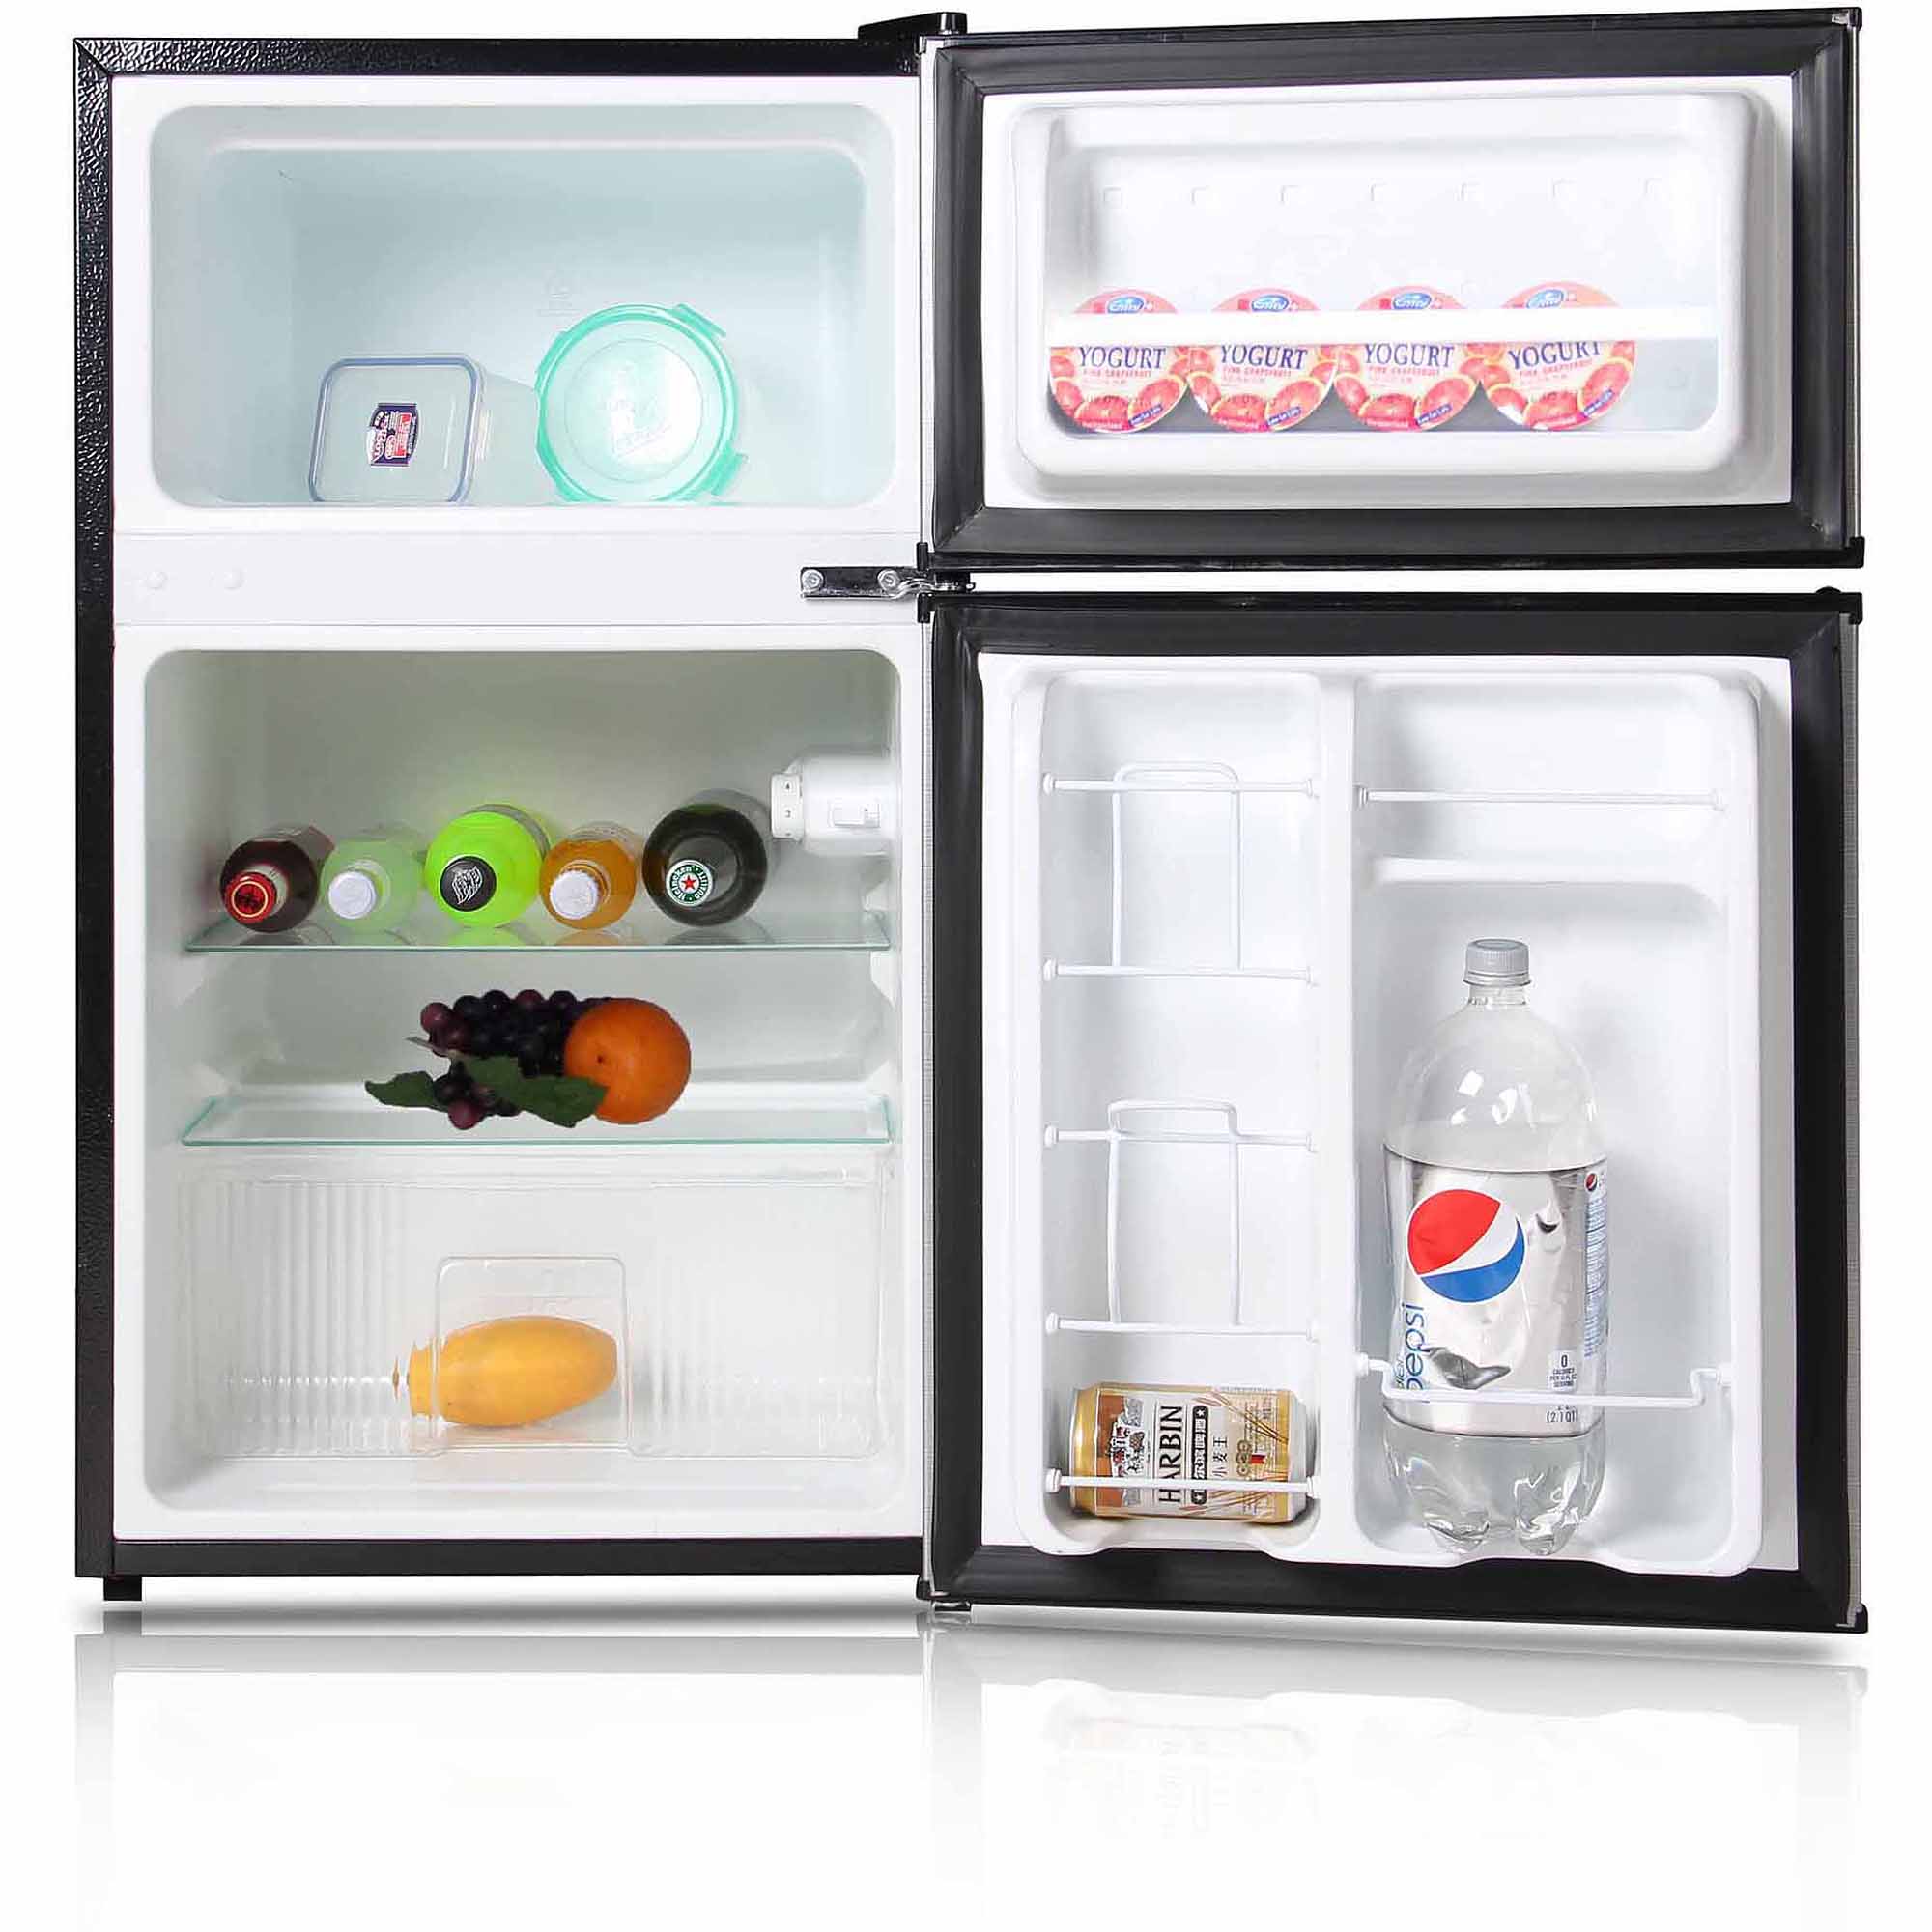 Midea 3.1 cubic foot Compact Refrigerator and Freezer - image 4 of 5